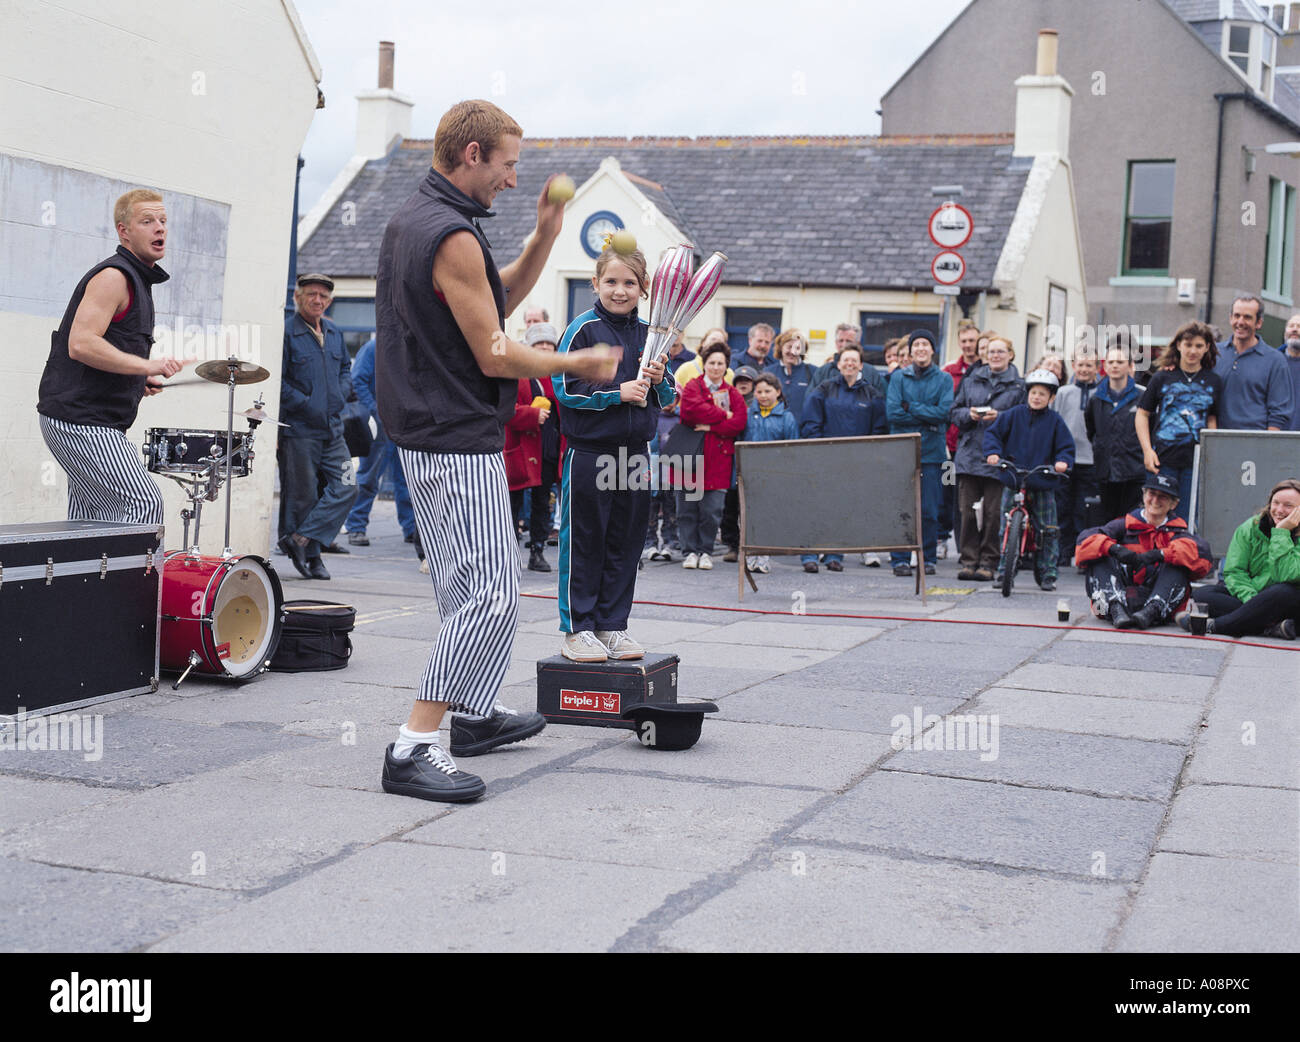 dh Folk Festival STROMNESS ORKNEY Juggler Chipolatas5 traditional entertainers street theatre performance Stock Photo